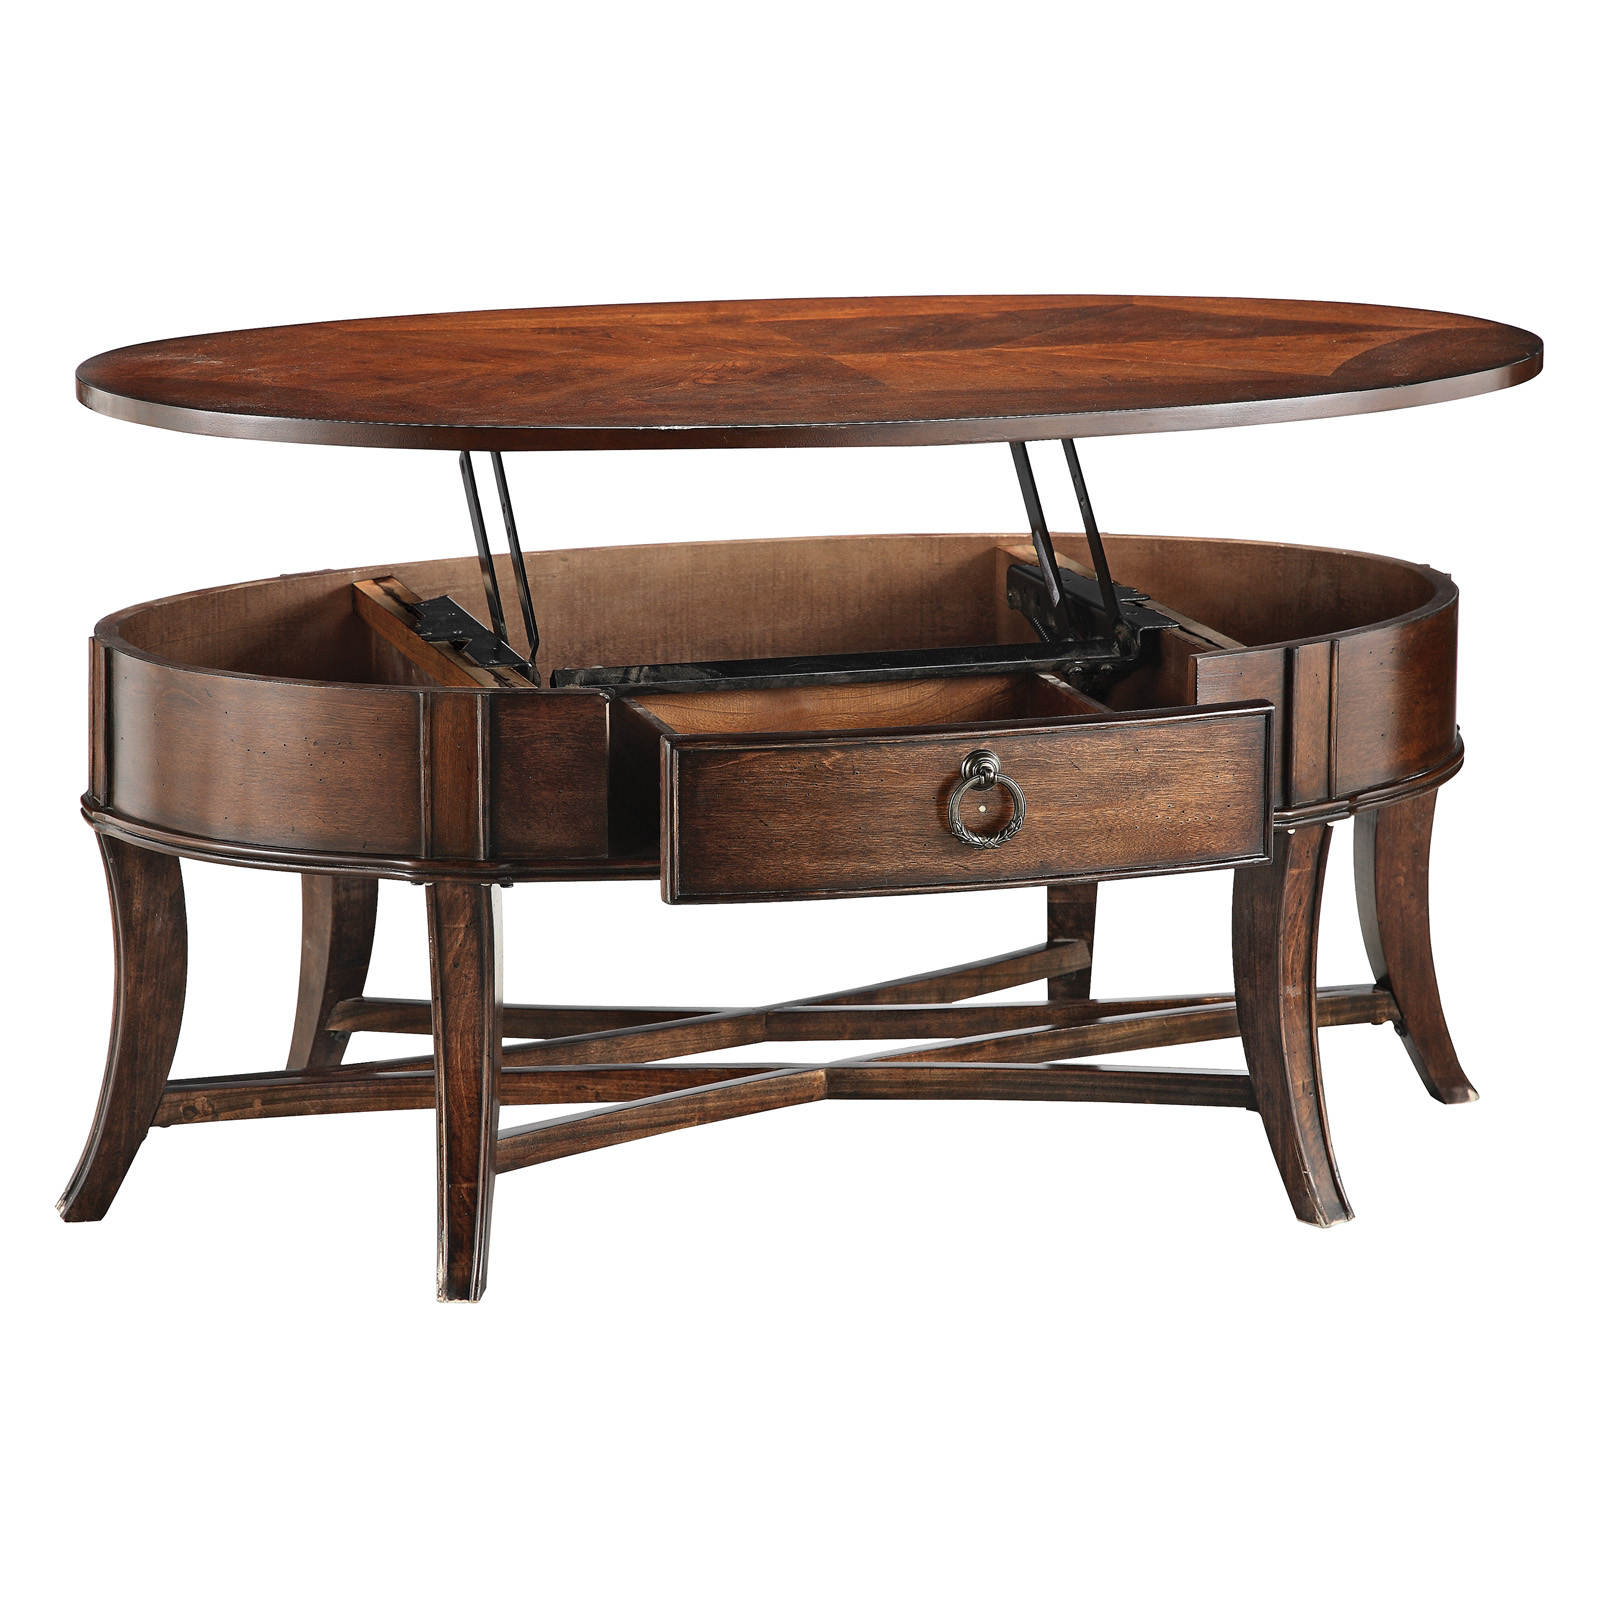 Oval coffee table with storage